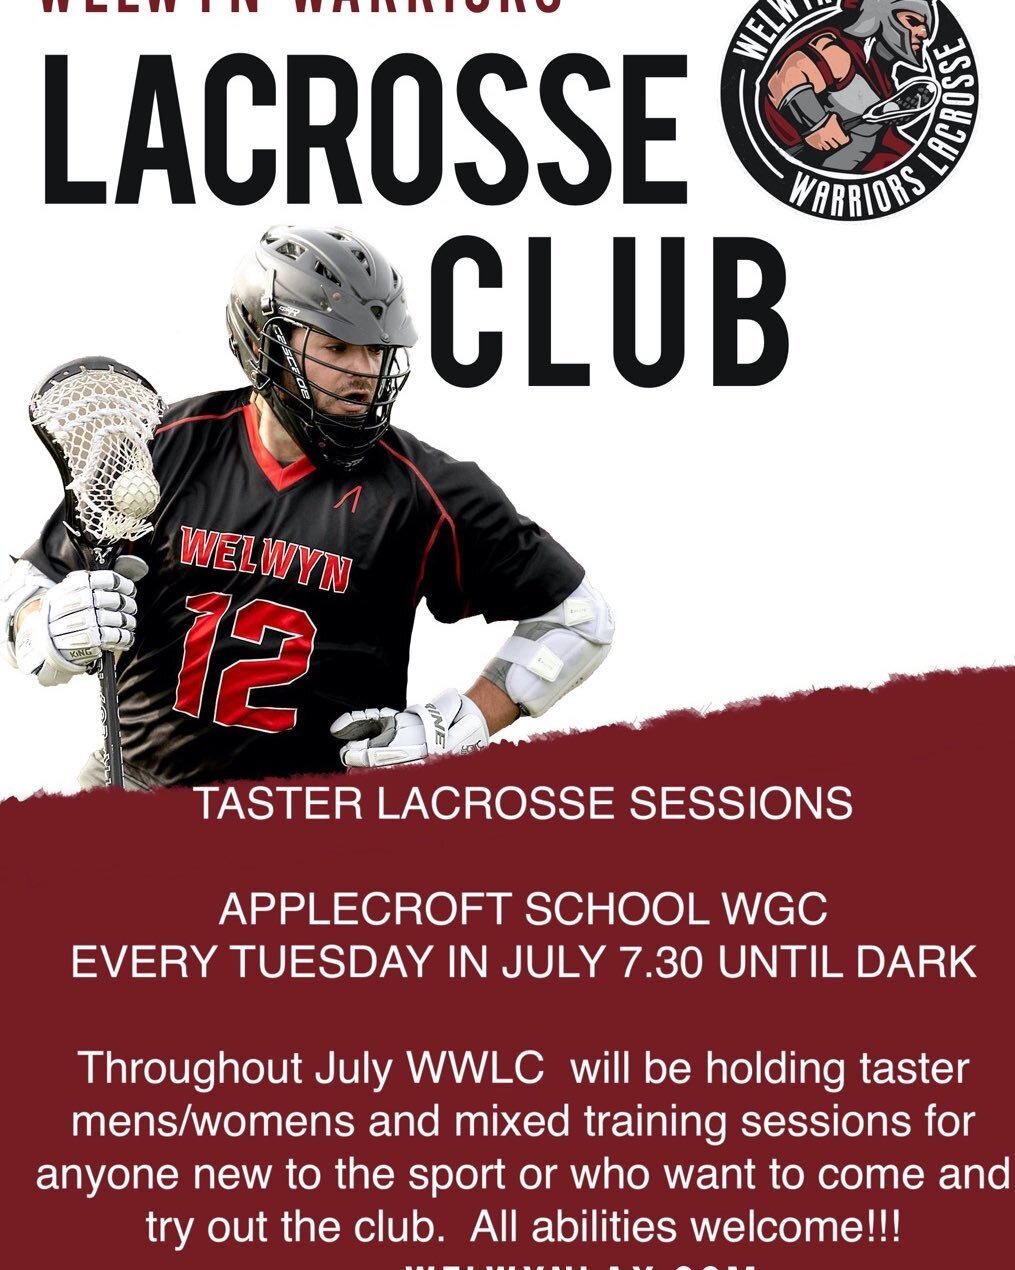 If you are looking to try a new sport this summer come and give lacrosse a go. Throughout July we will be running taster sessions open to all abilities and totally free! 

DM for any questions